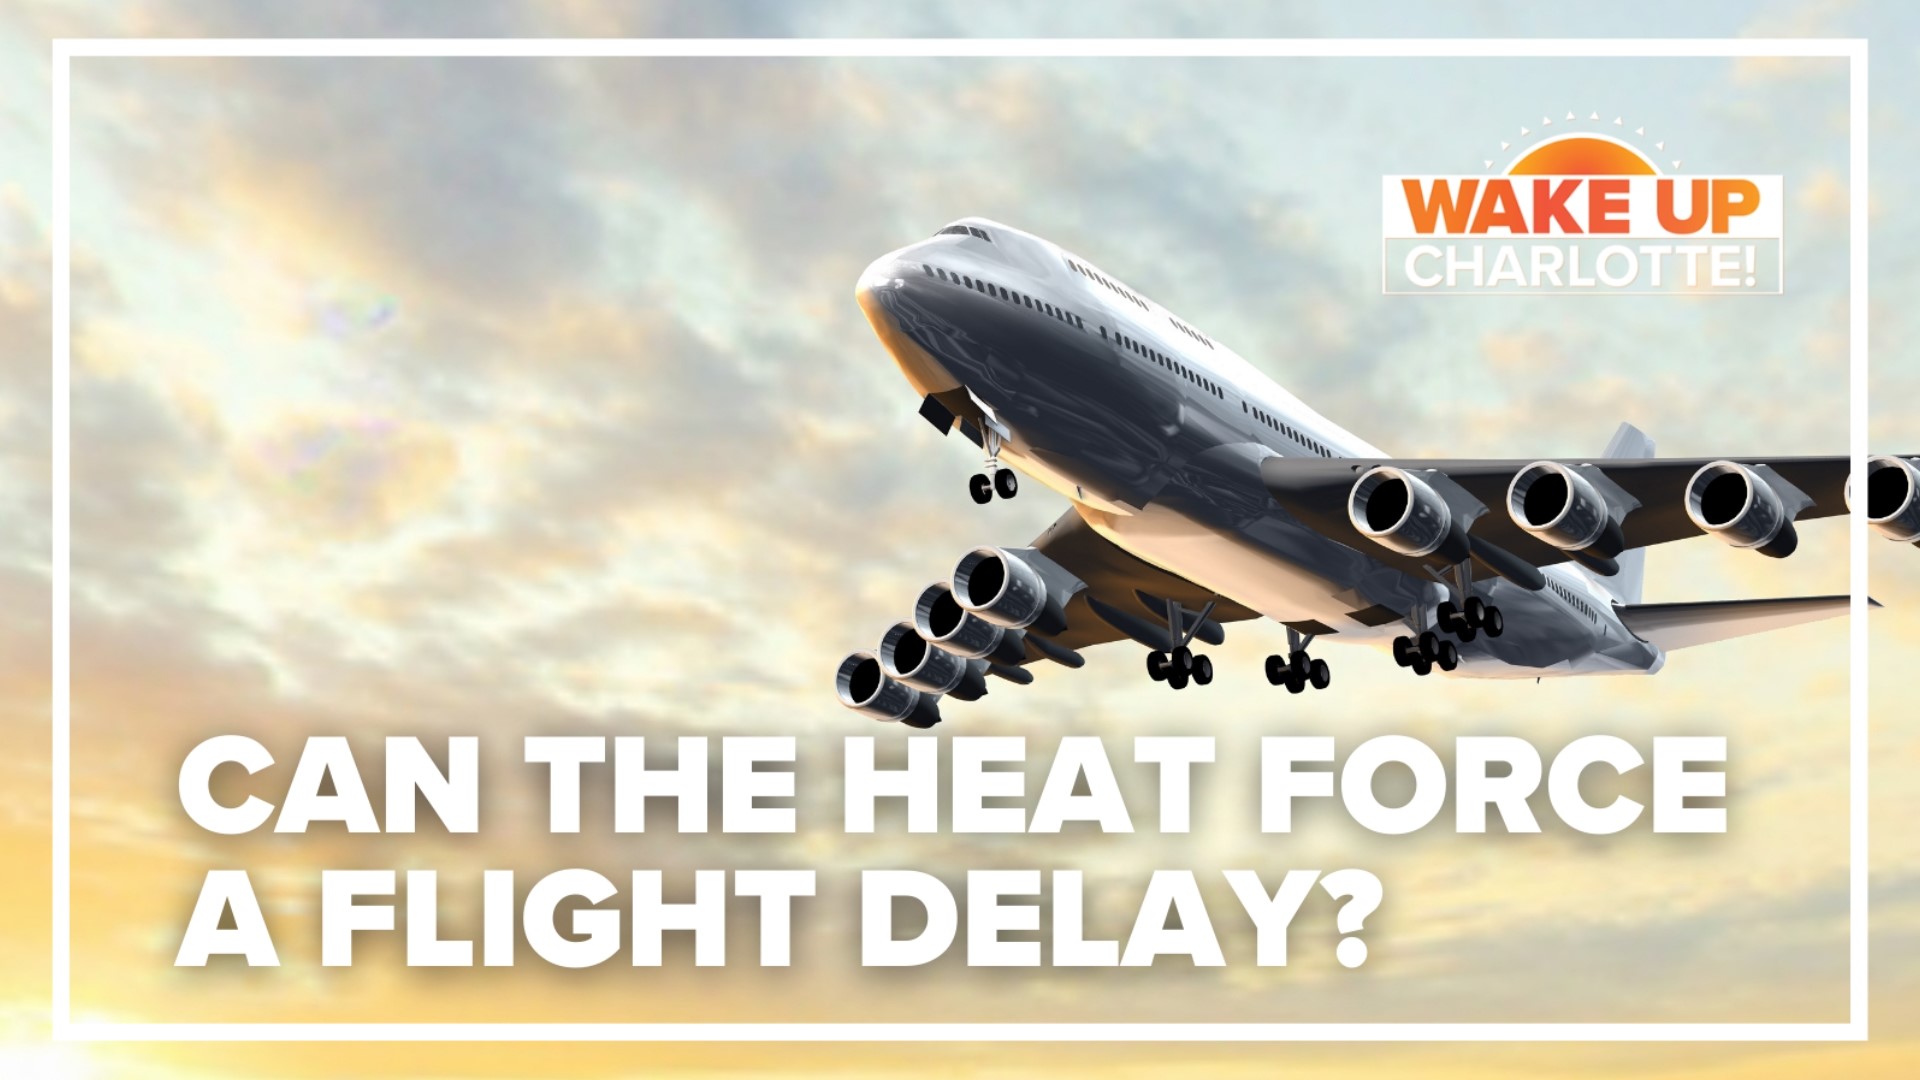 Under hot conditions, planes need more fuel, which means more weight adding another obstacle for take-off.